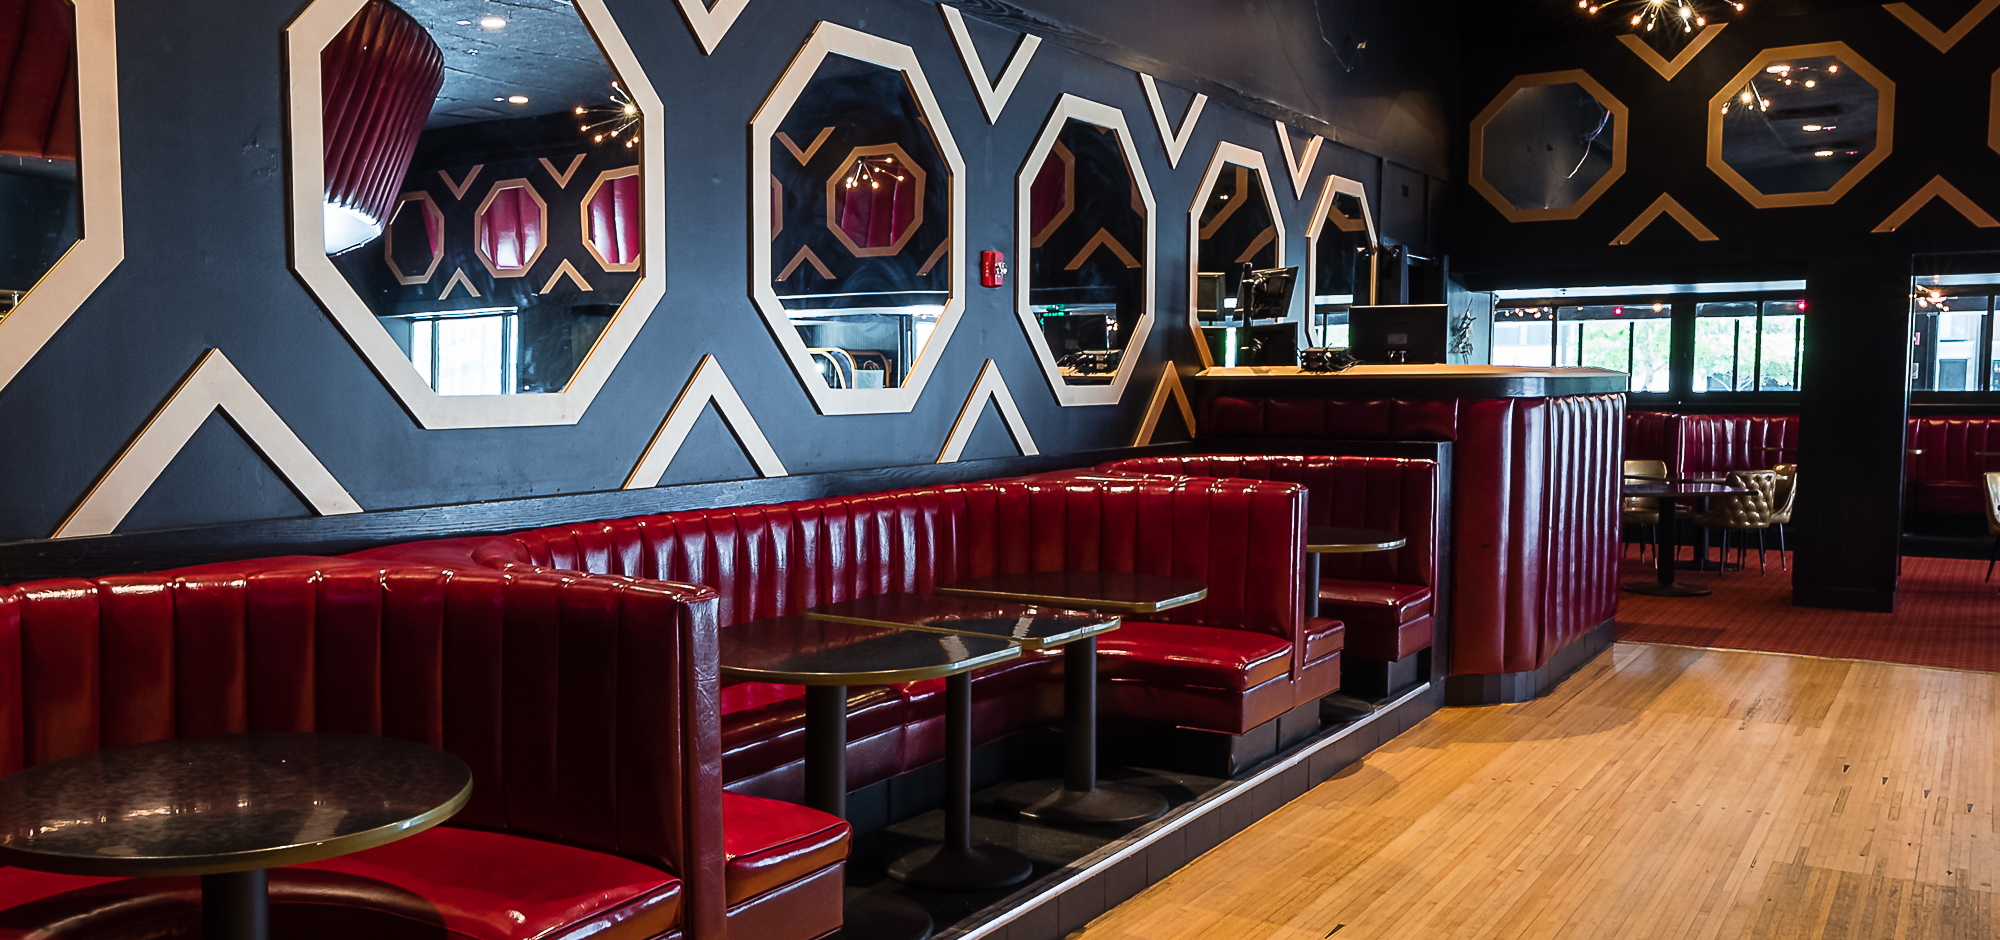 Several dining booths with dark gold colored tables and dark red vinyl seats. On the black walls are patterns of hexagon mirrors and vertical triangles, both with white trim.